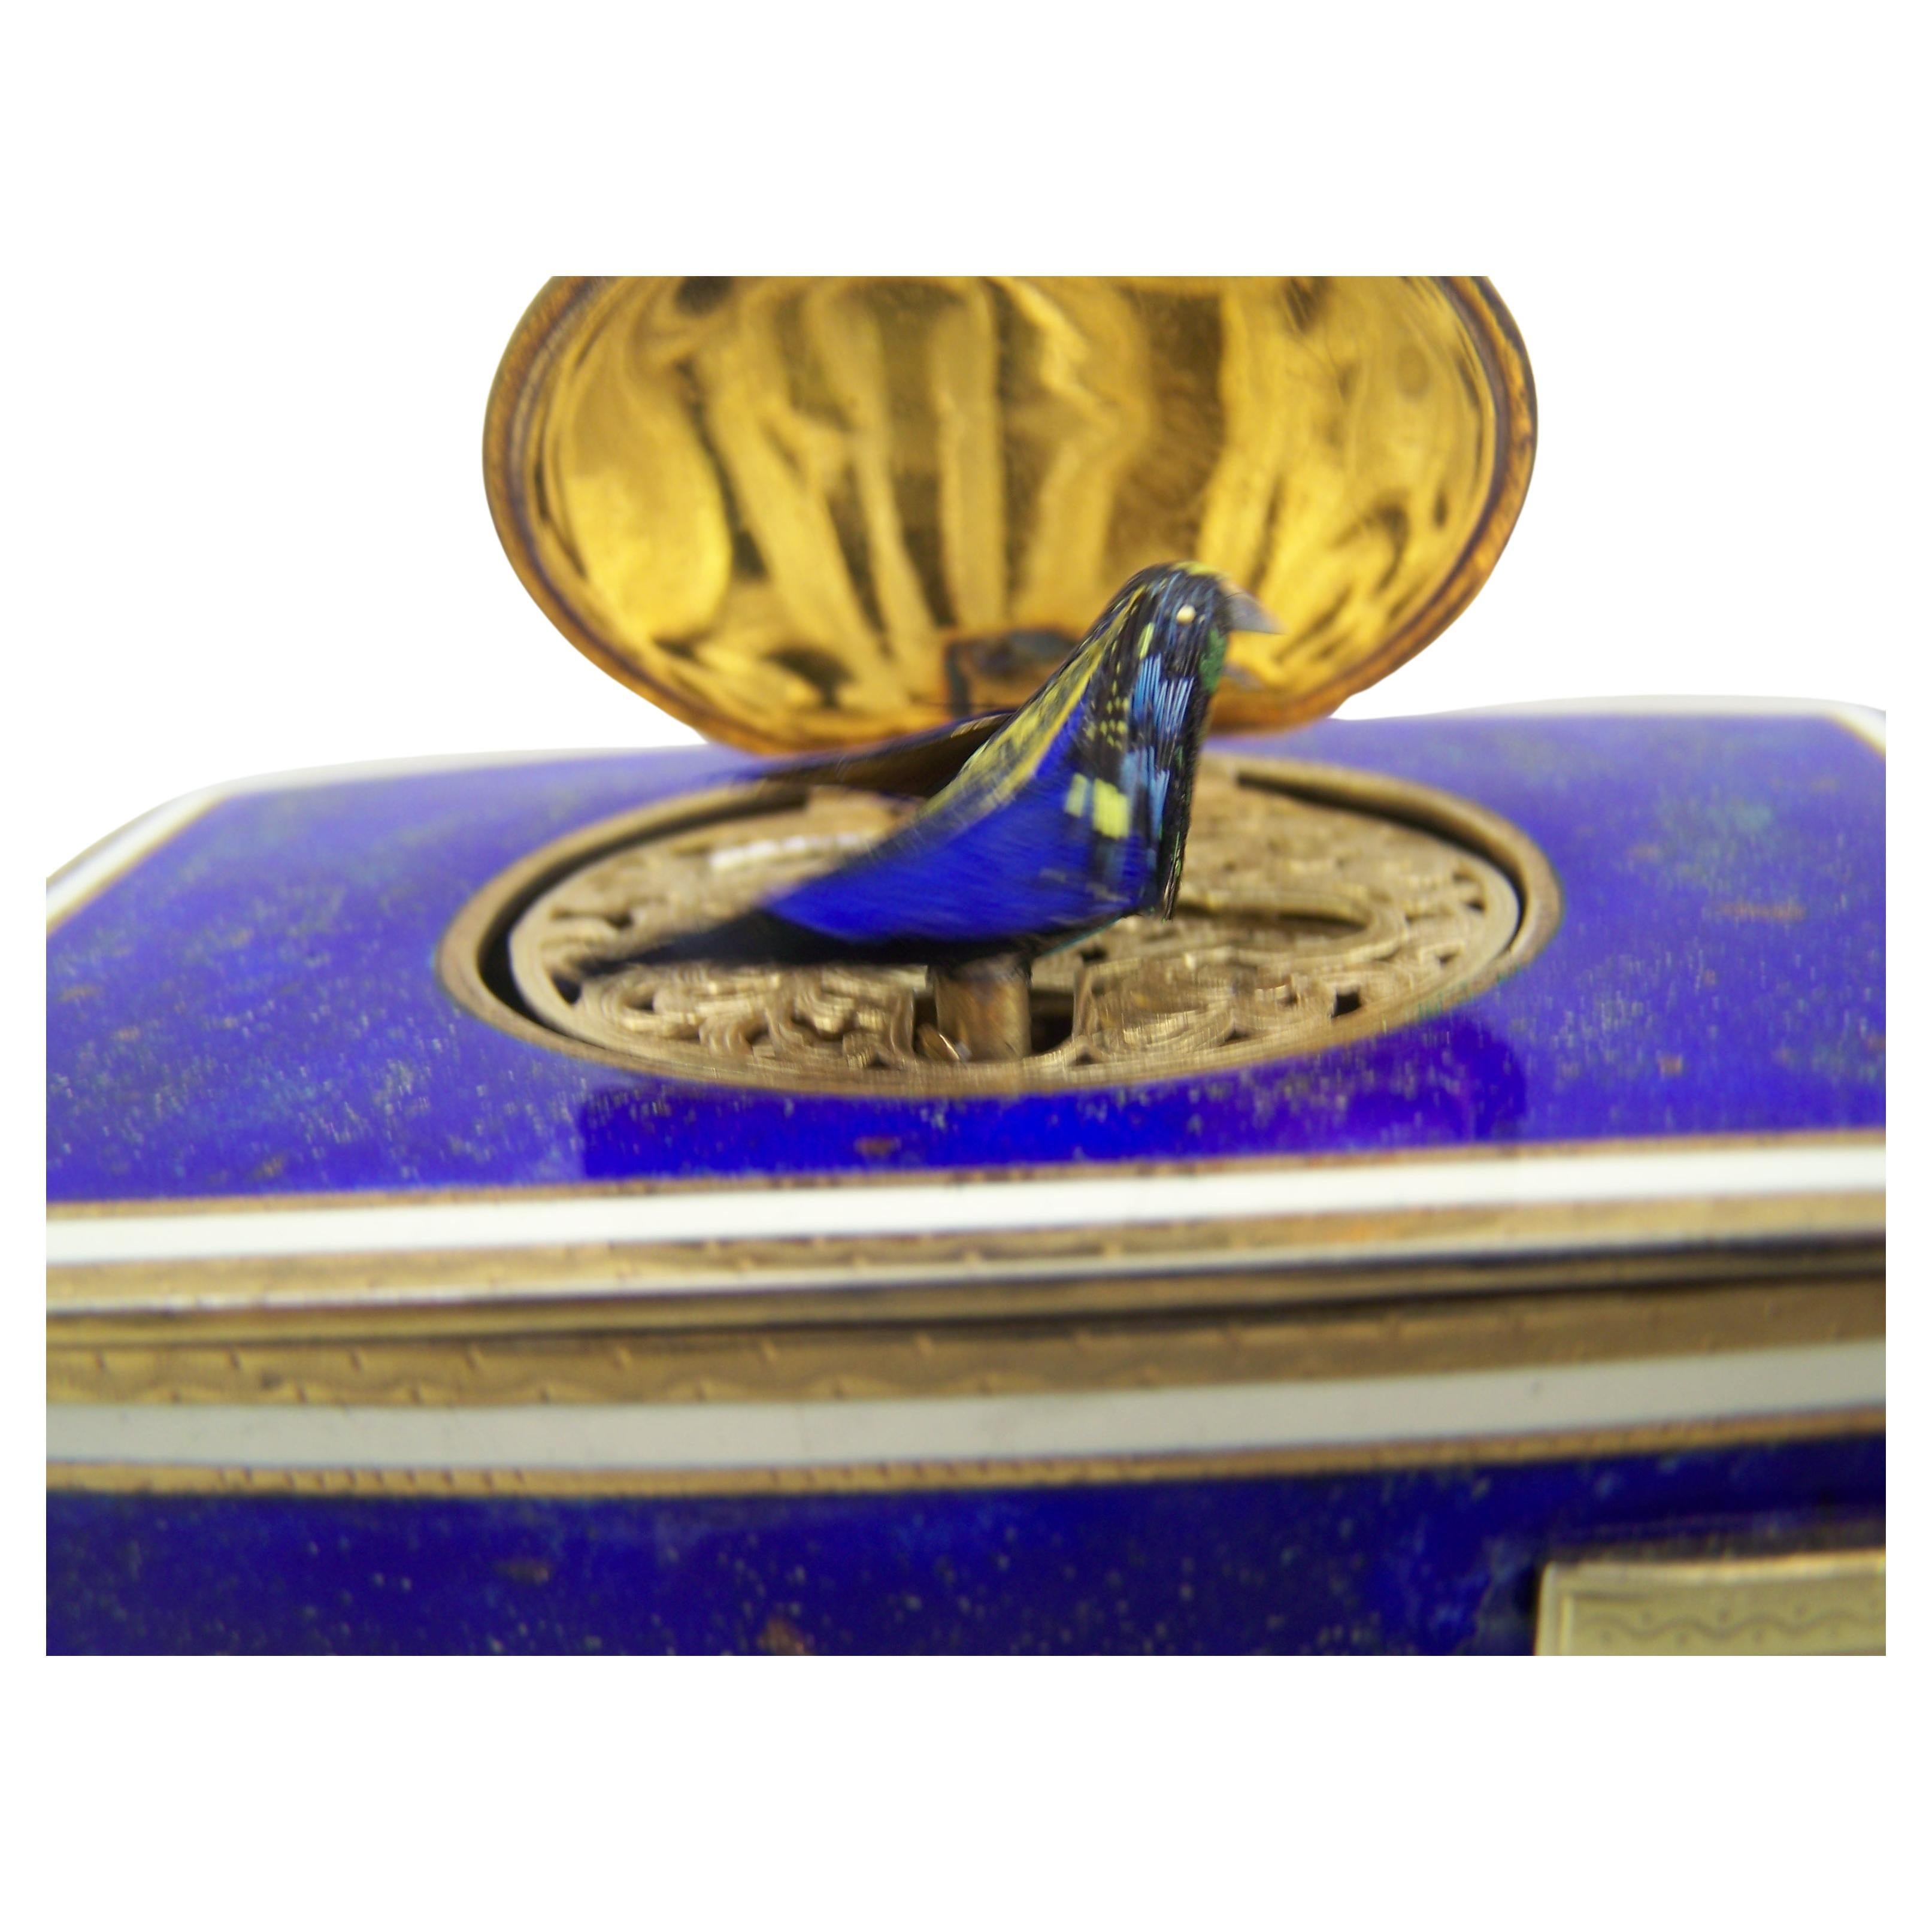 Singing bird box by K Griesbaum in guilded case and blue-goldflaked enamel